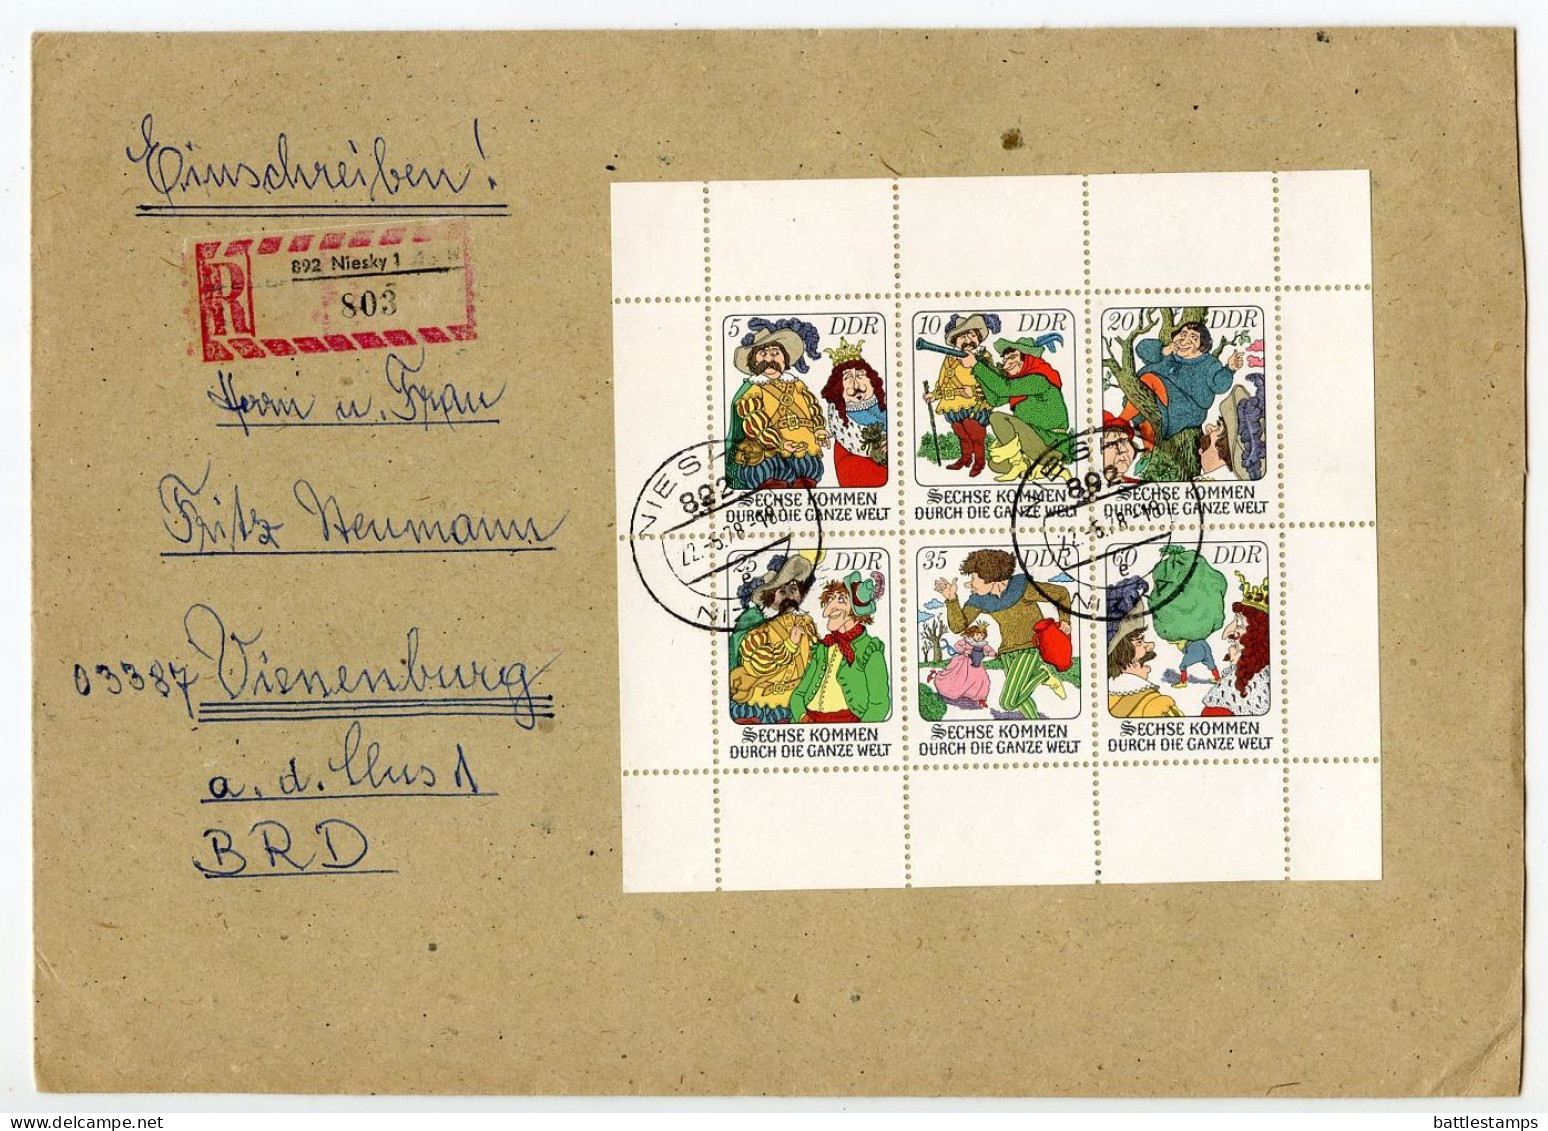 Germany, East 1978 Registered Cover; Niesky To Vienenburg; Stamps - Six Men Around The World Fairy Tale, Block Of 6 - Lettres & Documents